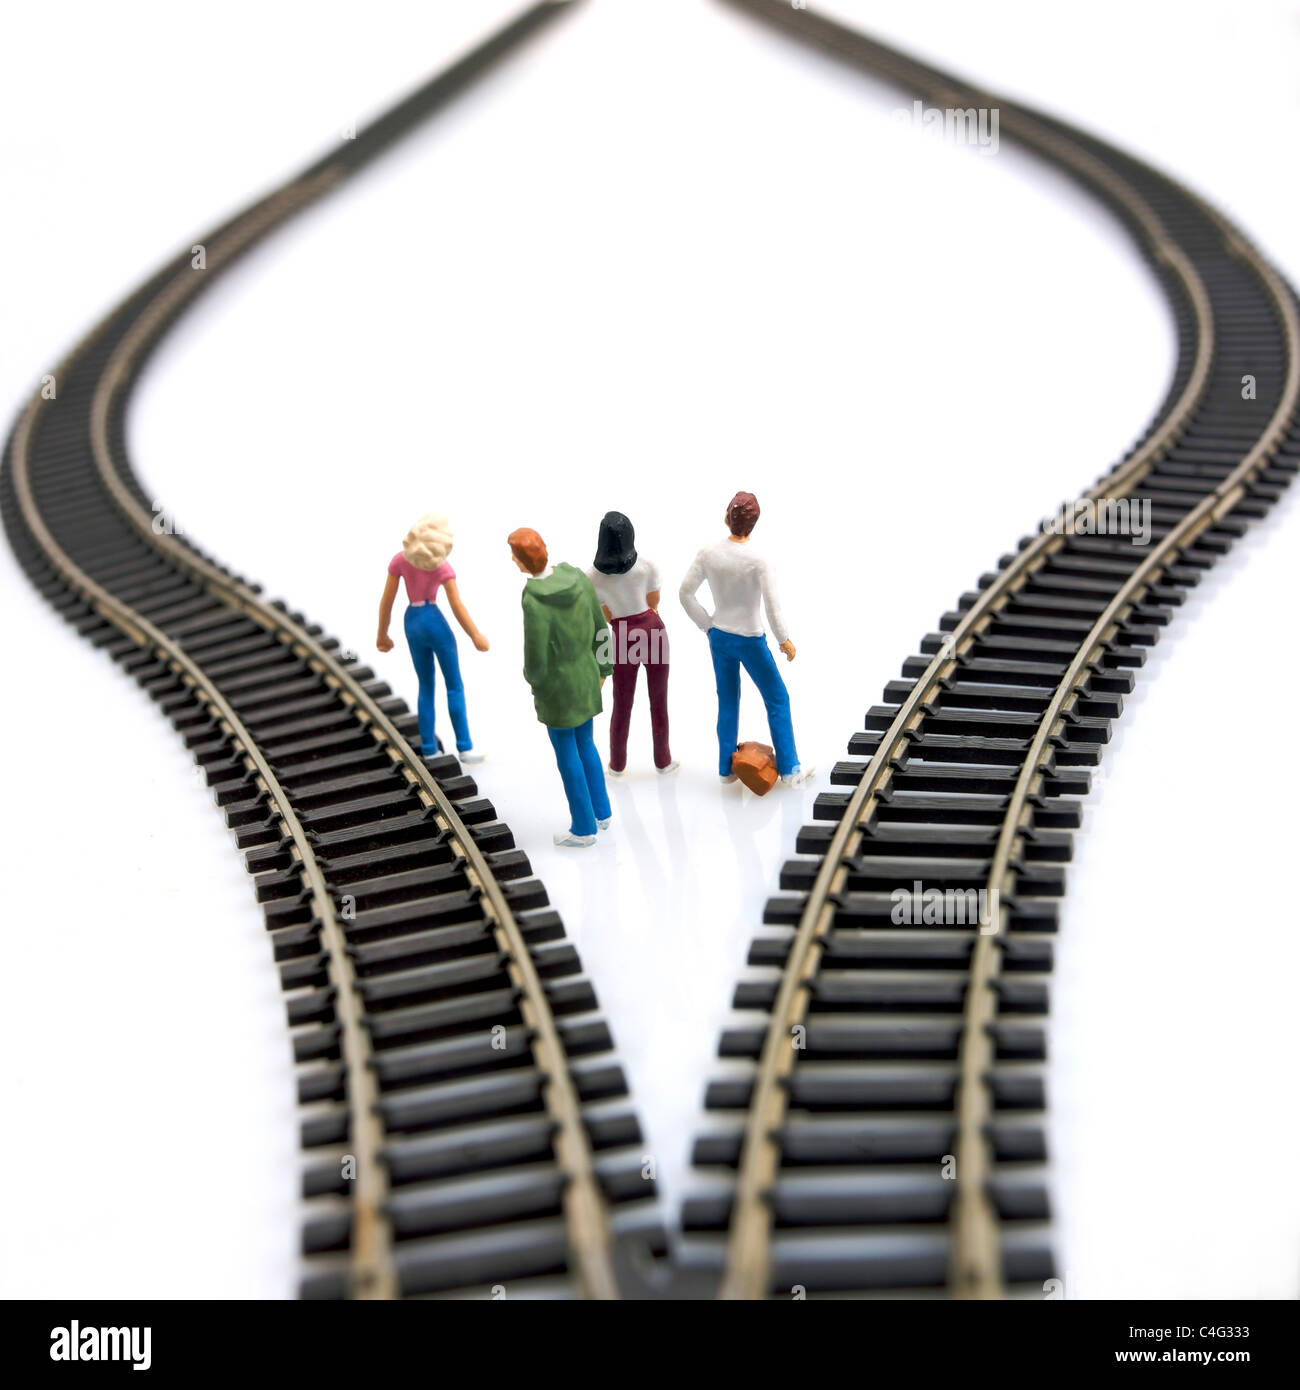 Young people figurines between two tracks leading into different directions, symbolic image for making decisions. Stock Photo